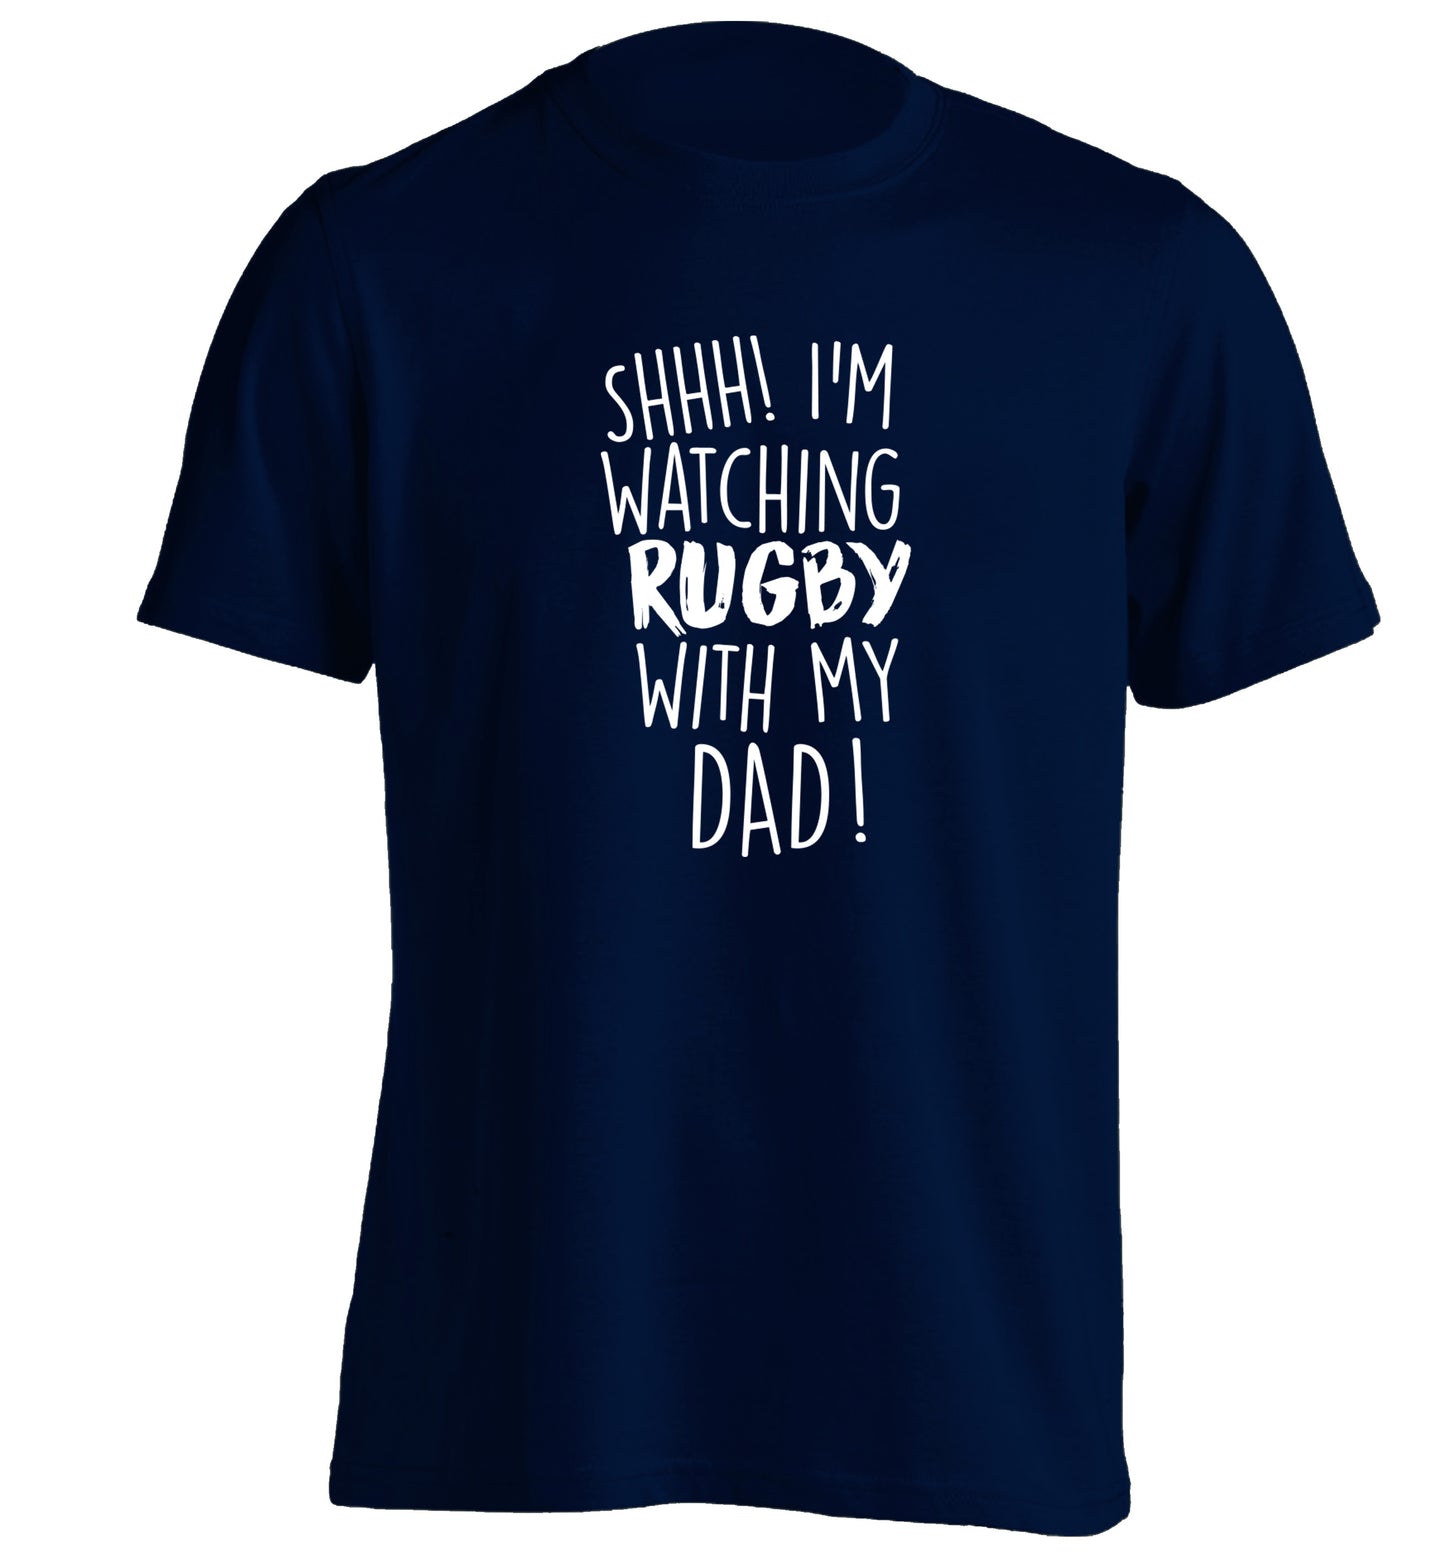 Shh... I'm watching rugby with my dad adults unisex navy Tshirt 2XL